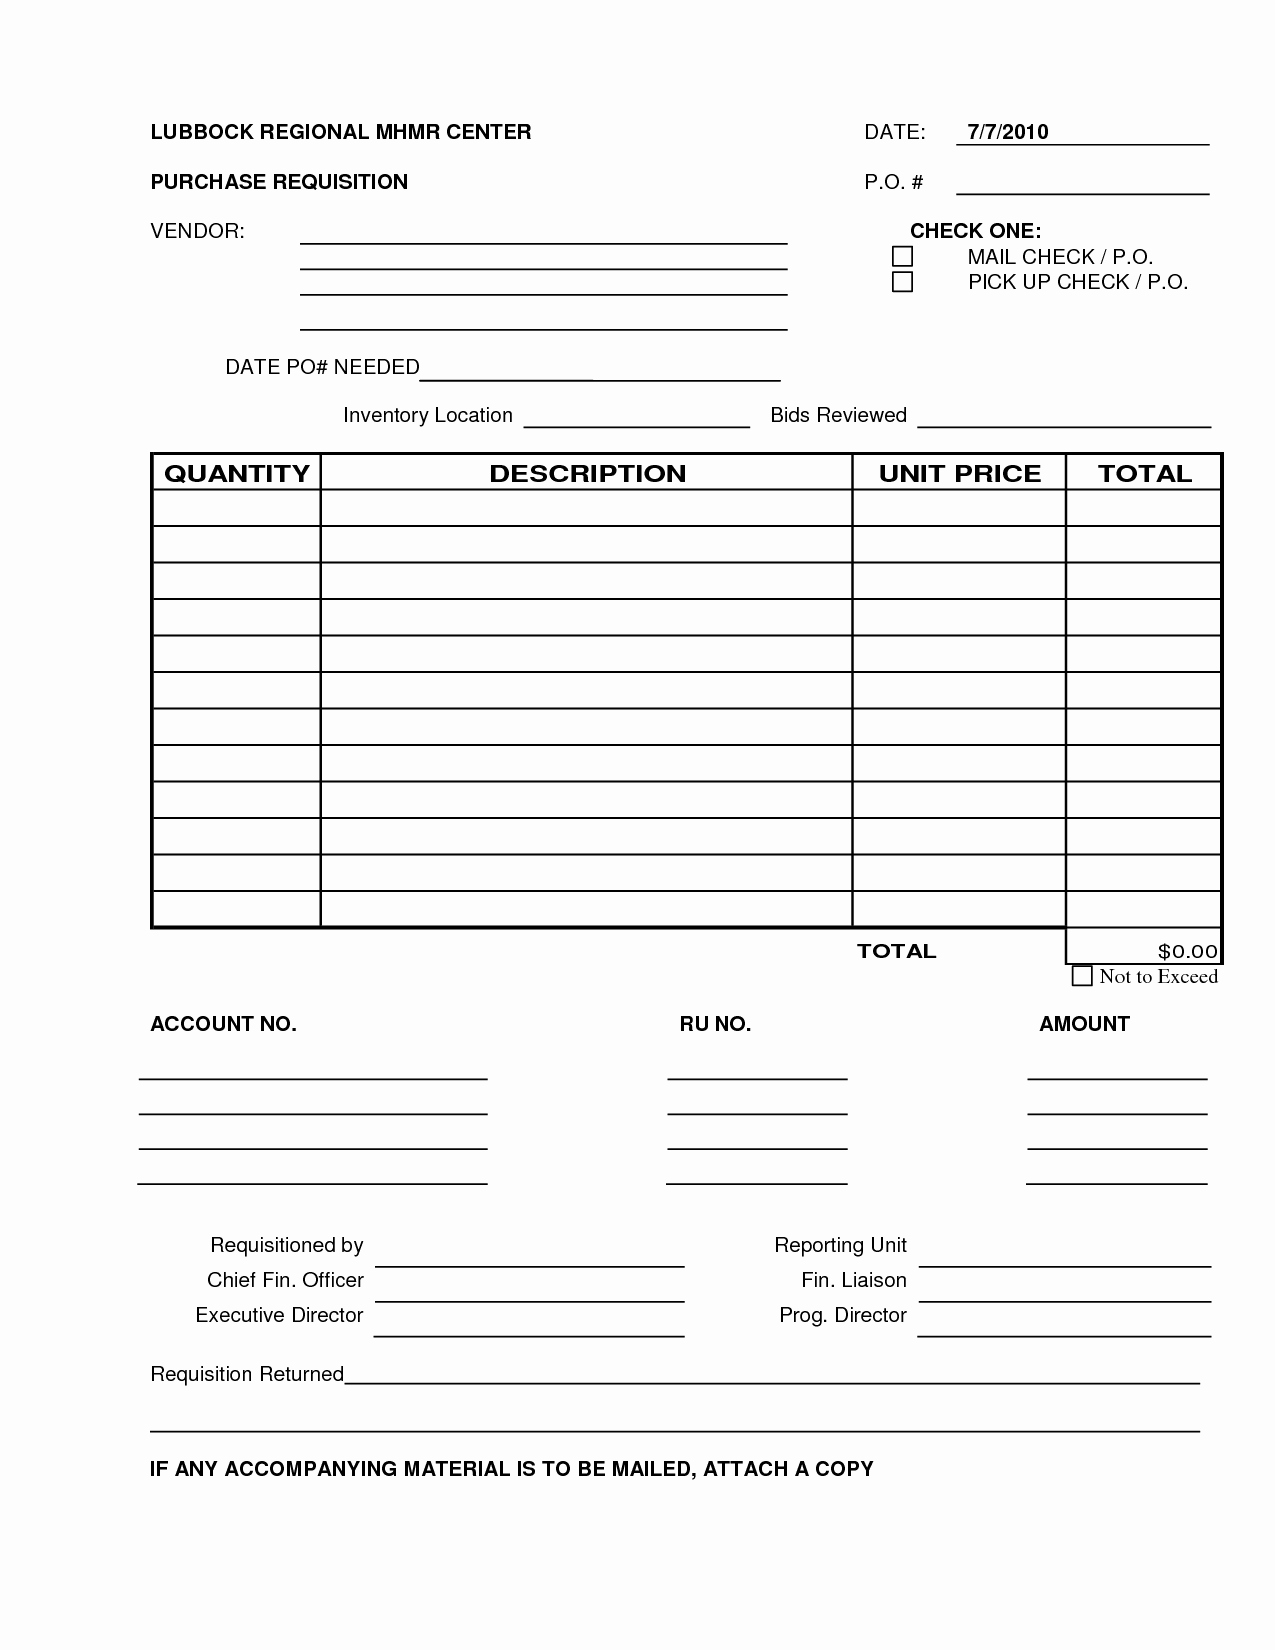 Purchase Request form Template New Best S Of Purchase Requisition form Purchase